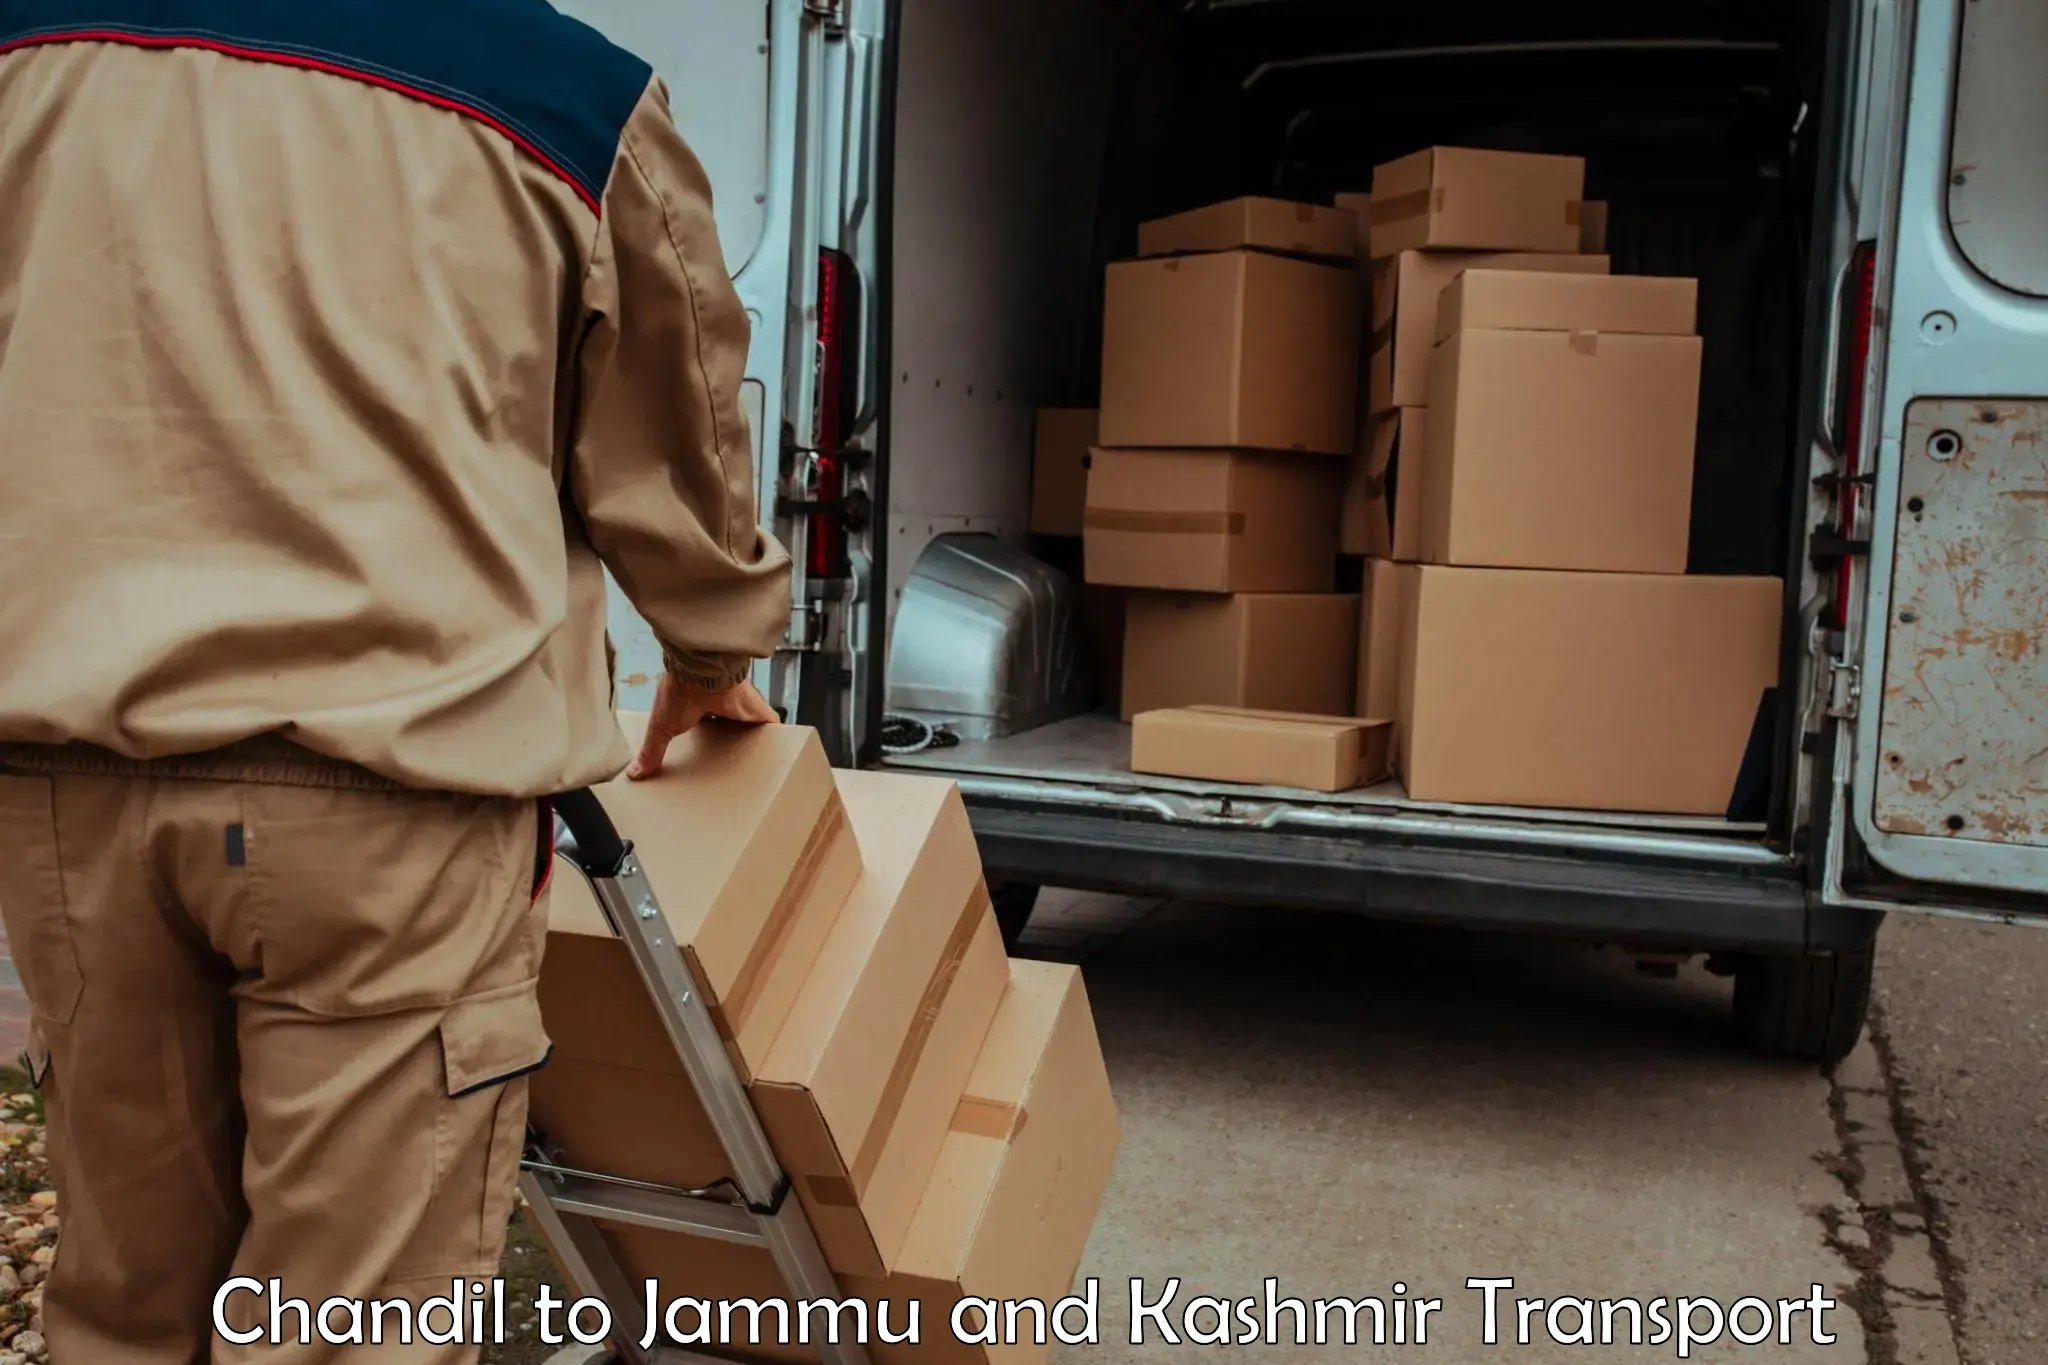 Delivery service Chandil to Jammu and Kashmir